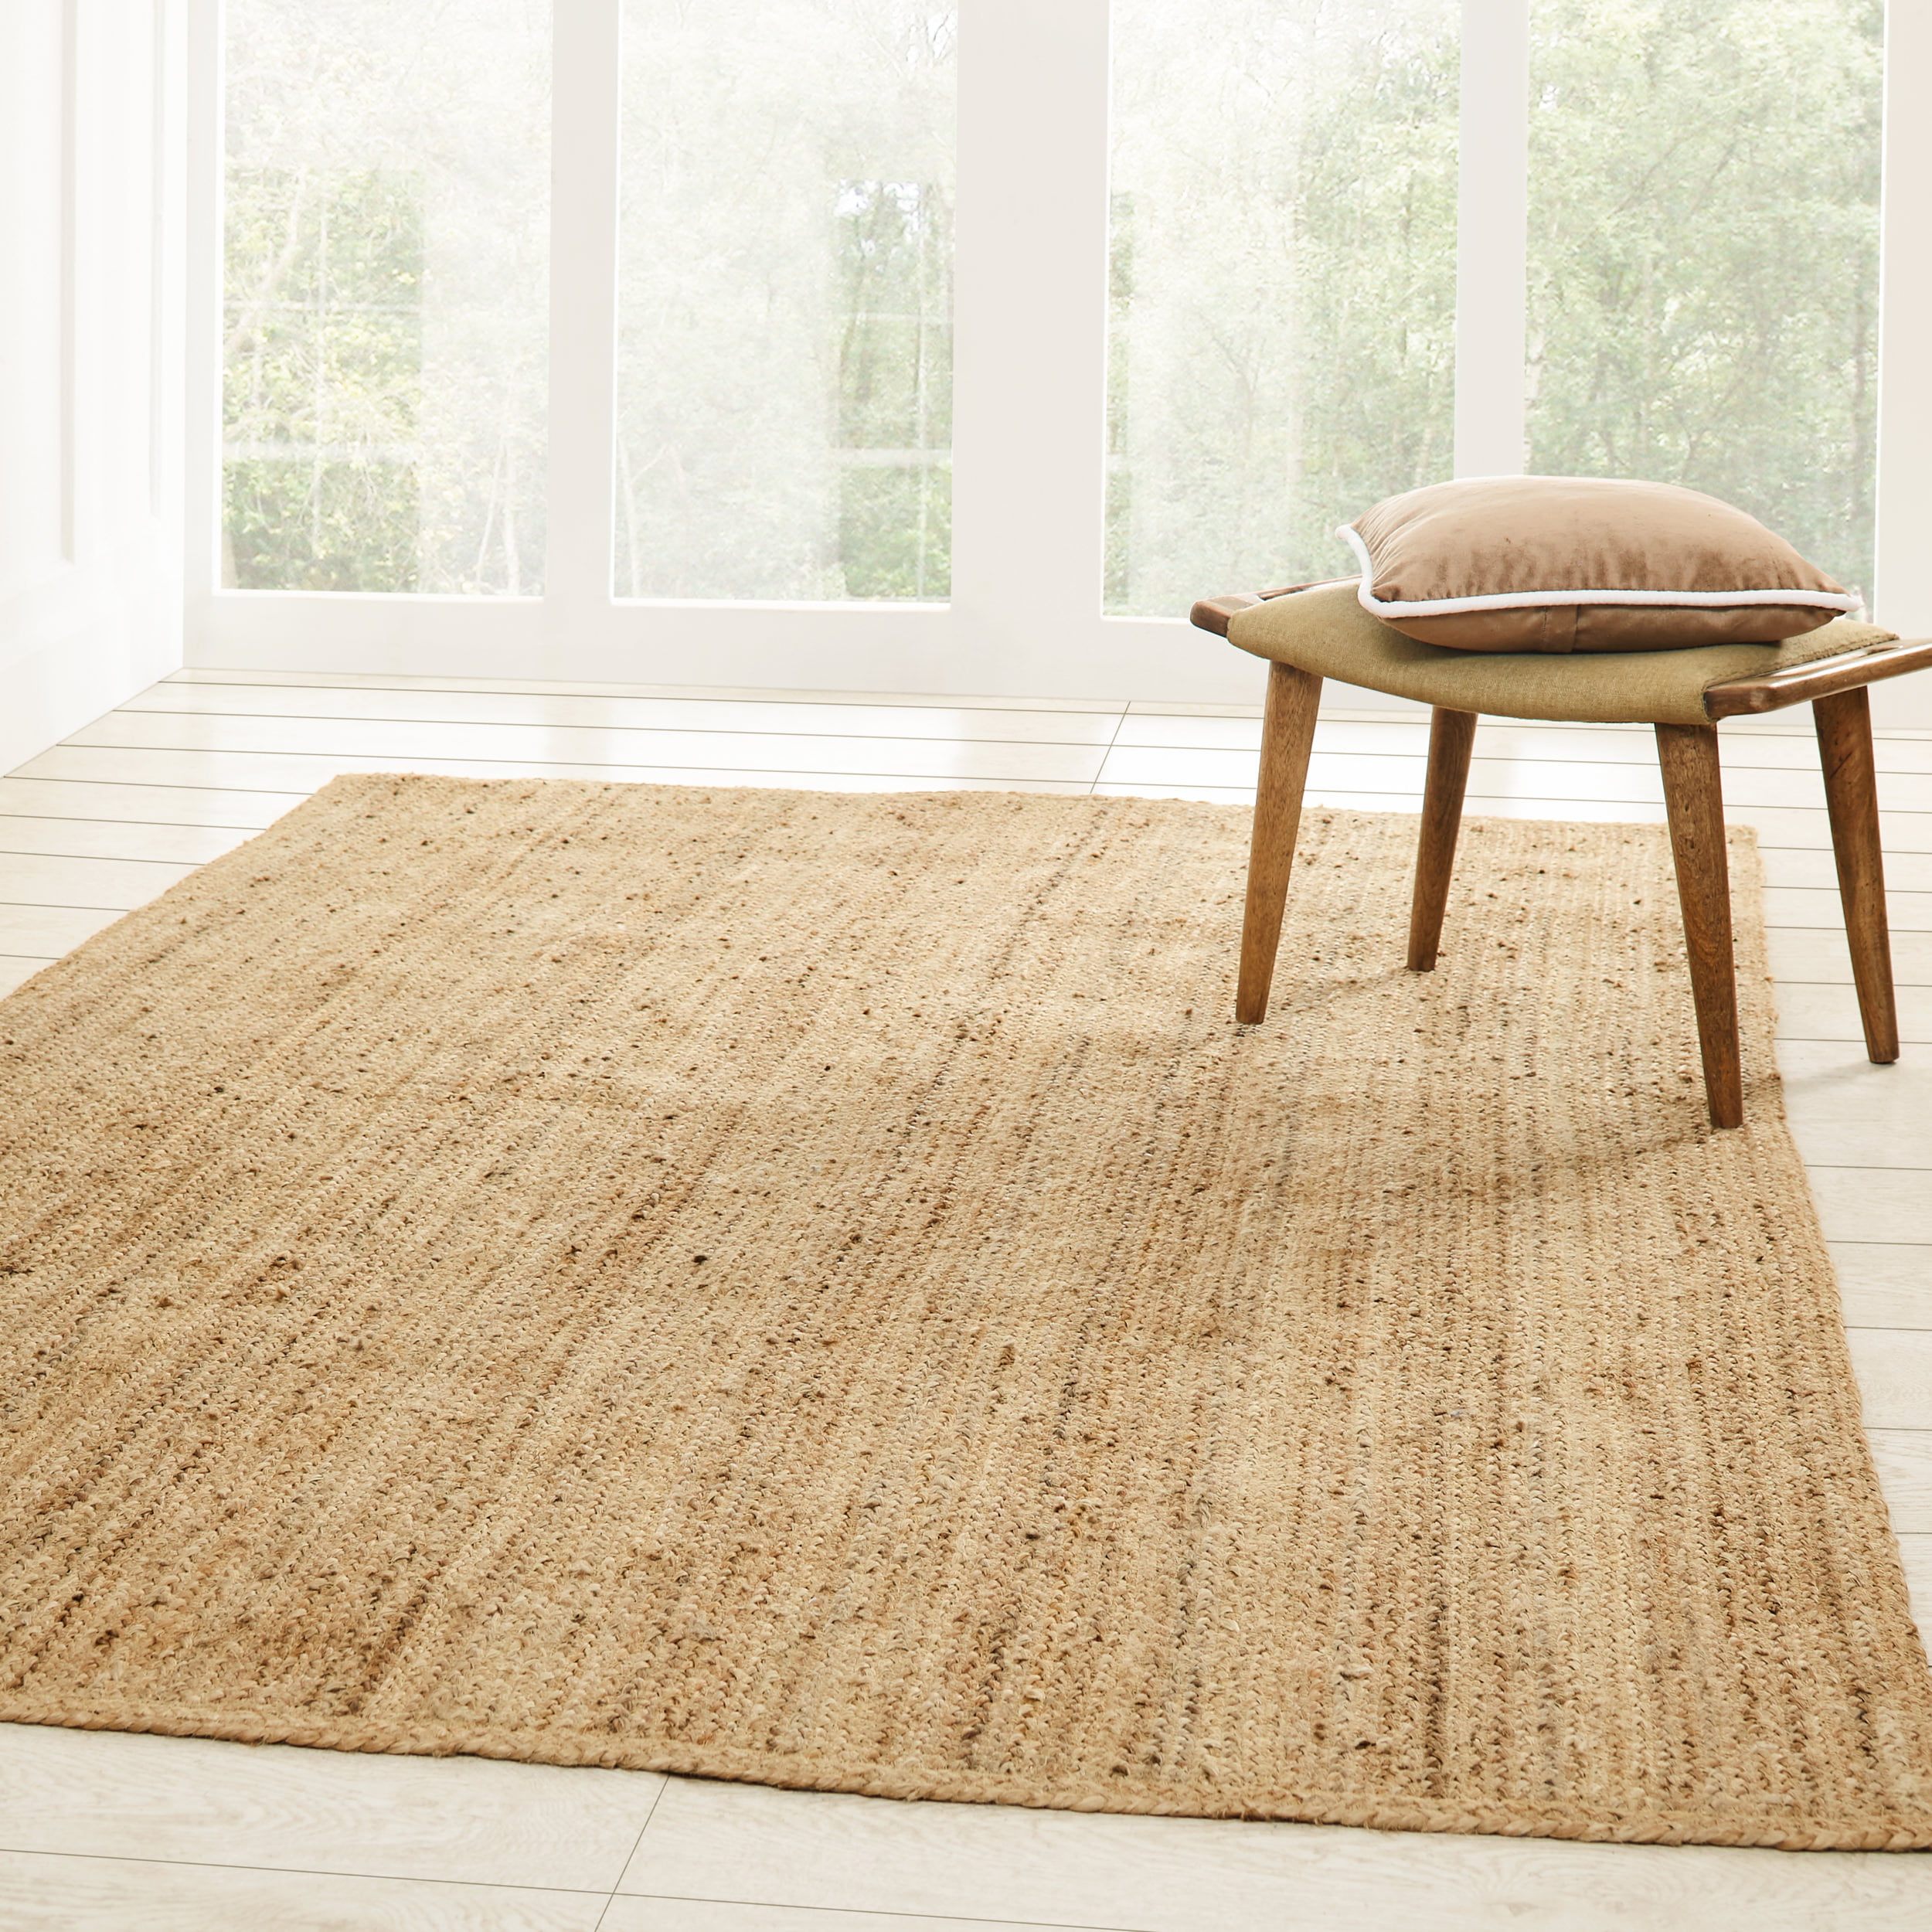 Photo 1 of [STOCK PHOTO FOR REFERENCE ONLY]
Impressions Keyser Braided Jute Indoor Area Rug 2x4